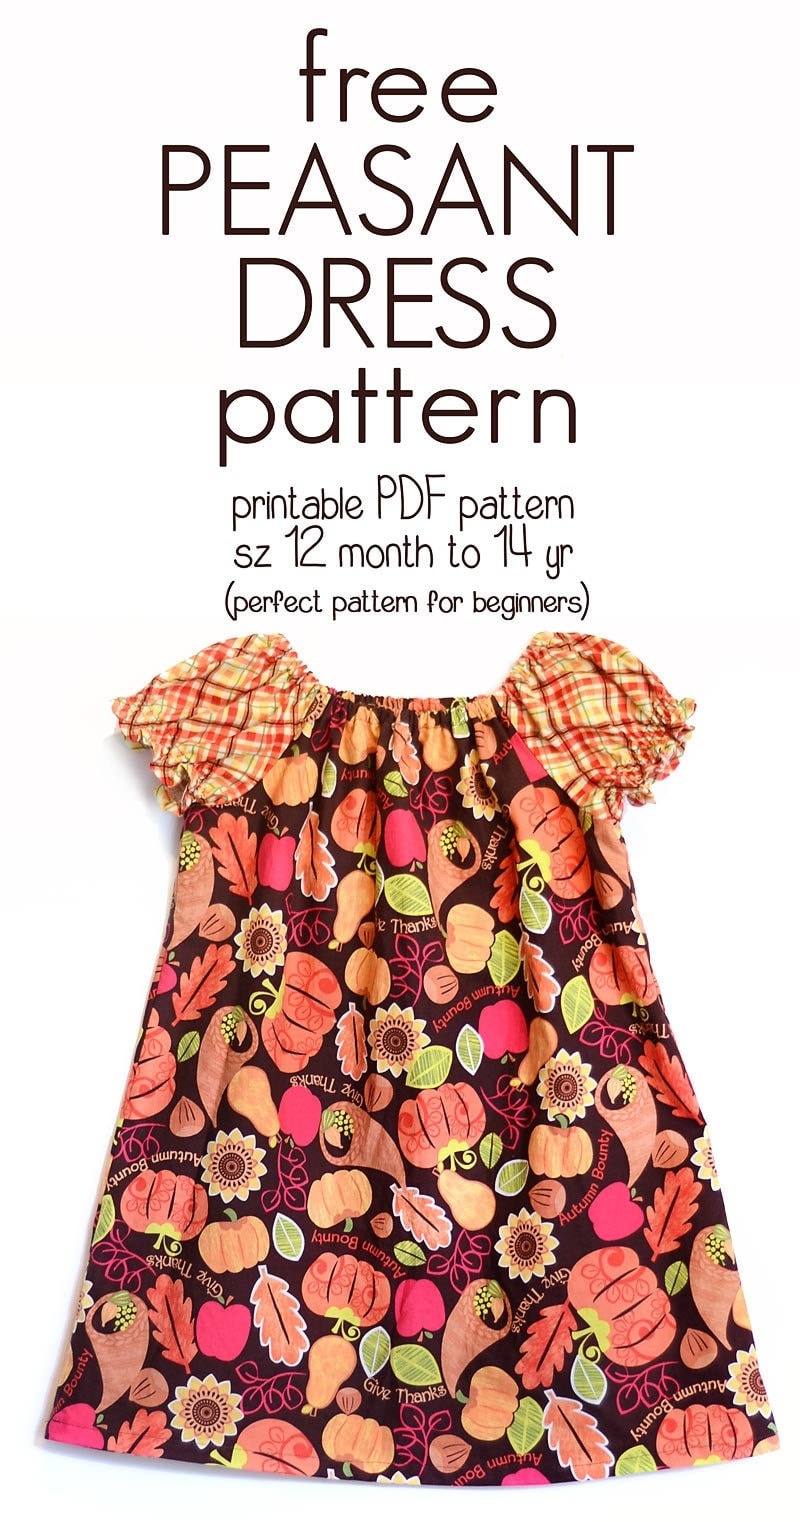 Learn How To Sew A Peasant Dress With This Free Peasant Dress - Free Printable Toddler Dress Patterns